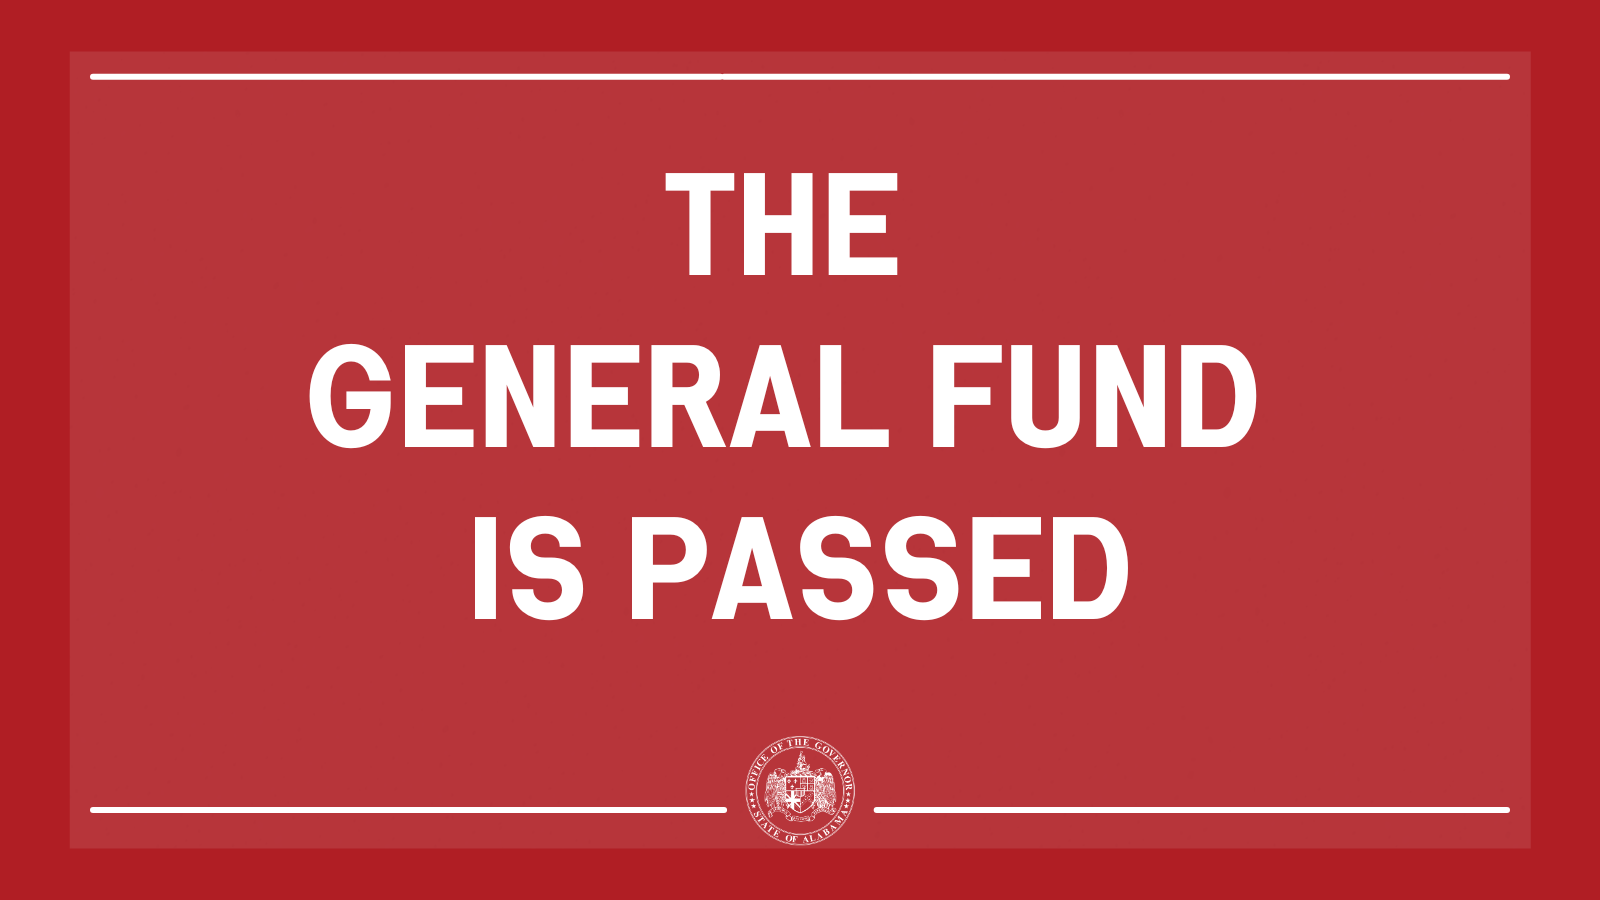 Governor Ivey Issues Statement on Passage of General Fund